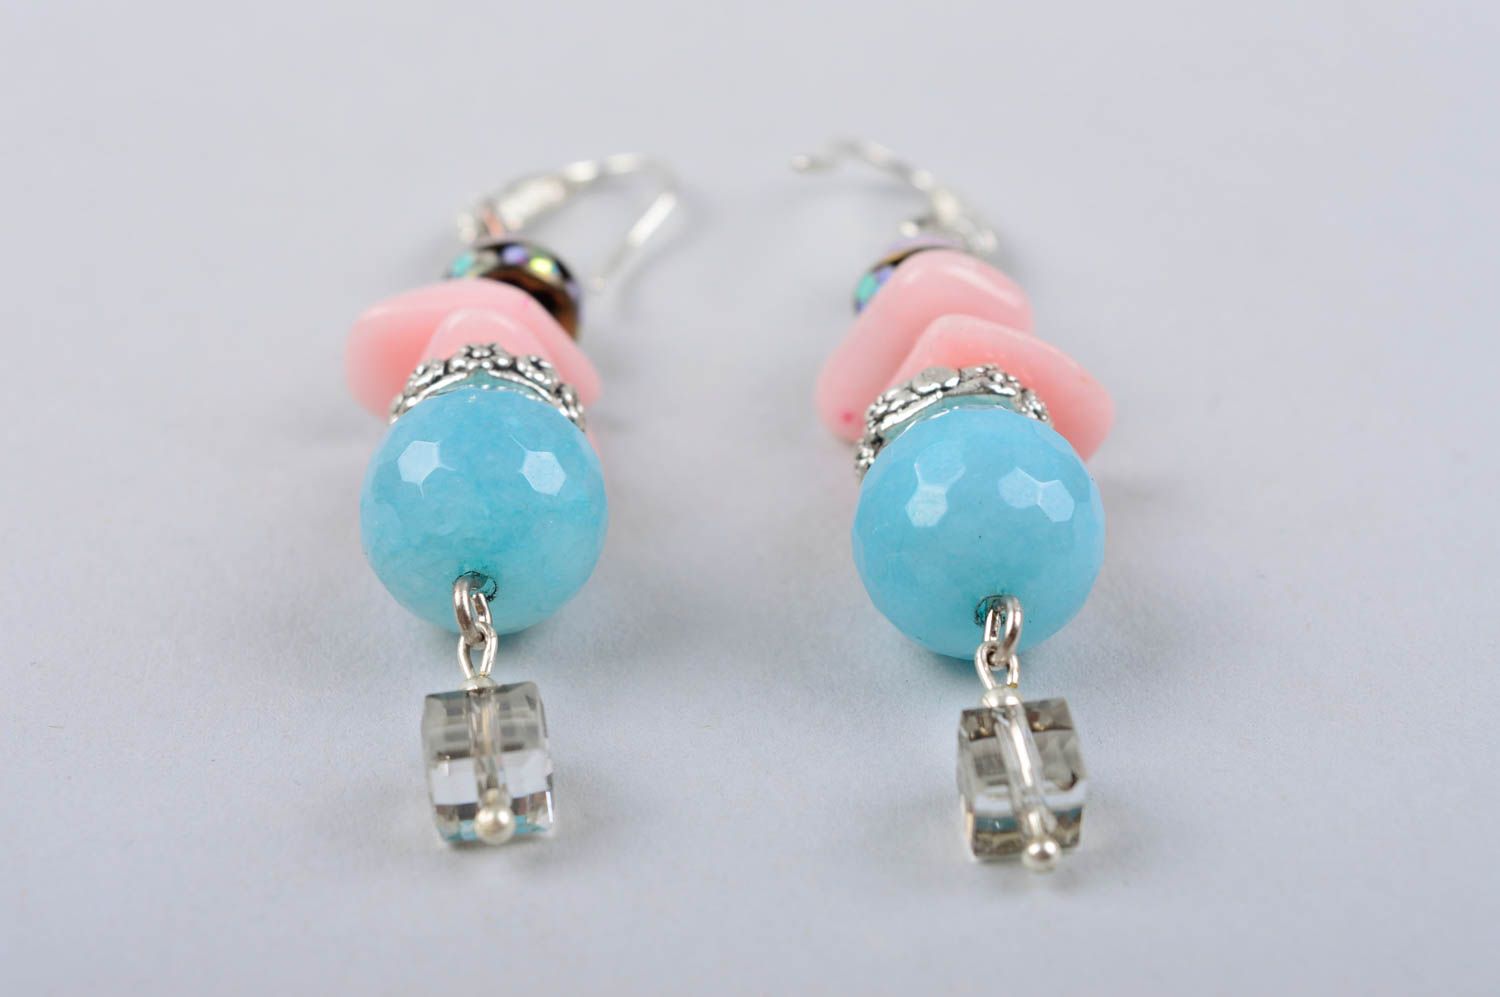 Designer accessory handmade earrings with agate pendants fashion jewelry photo 4